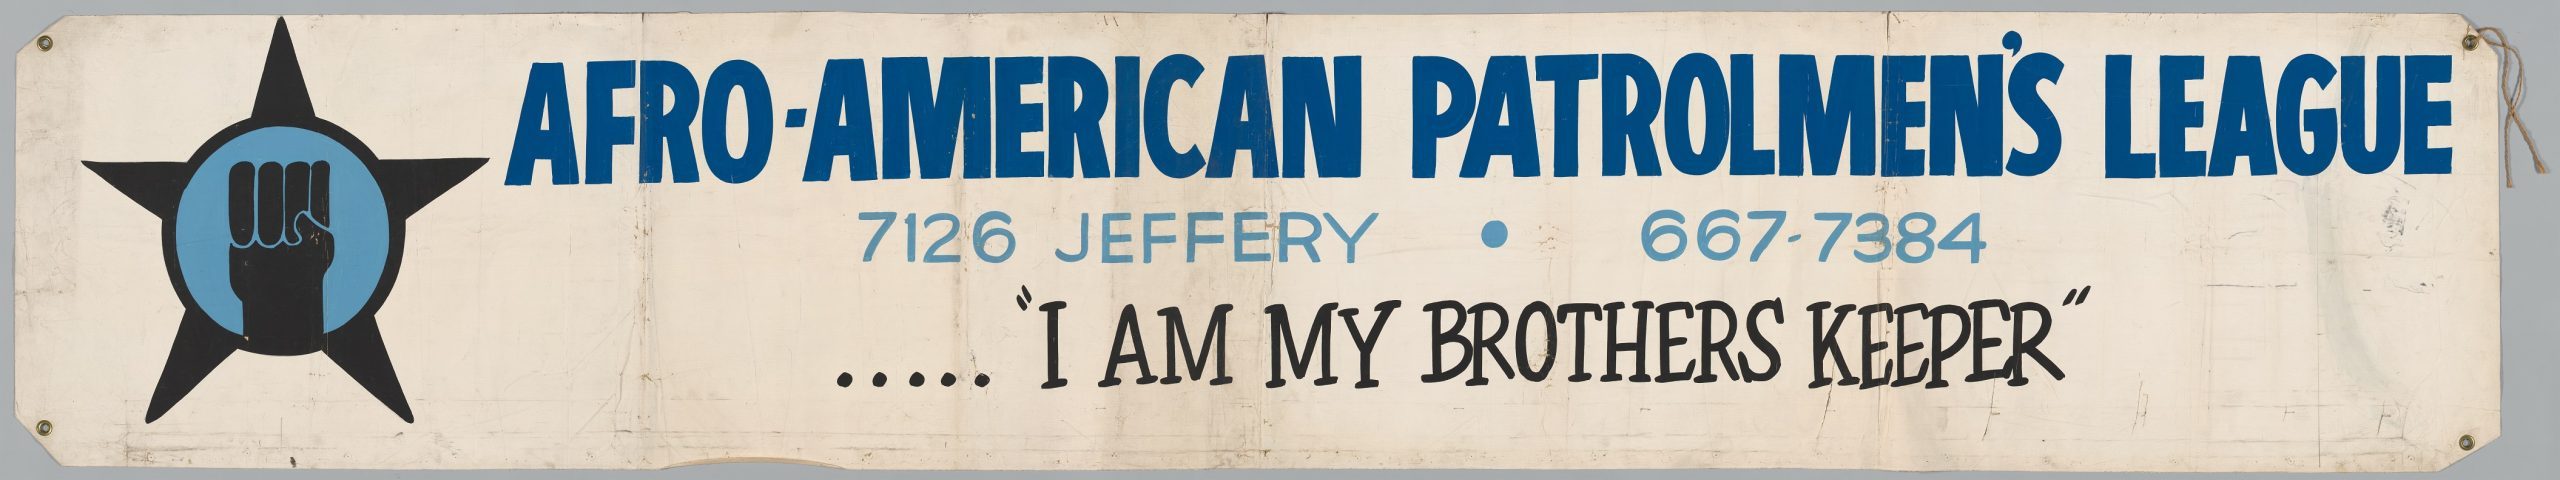 Afro-American Patrolman's League banner with motto "I am my brother's keeper"